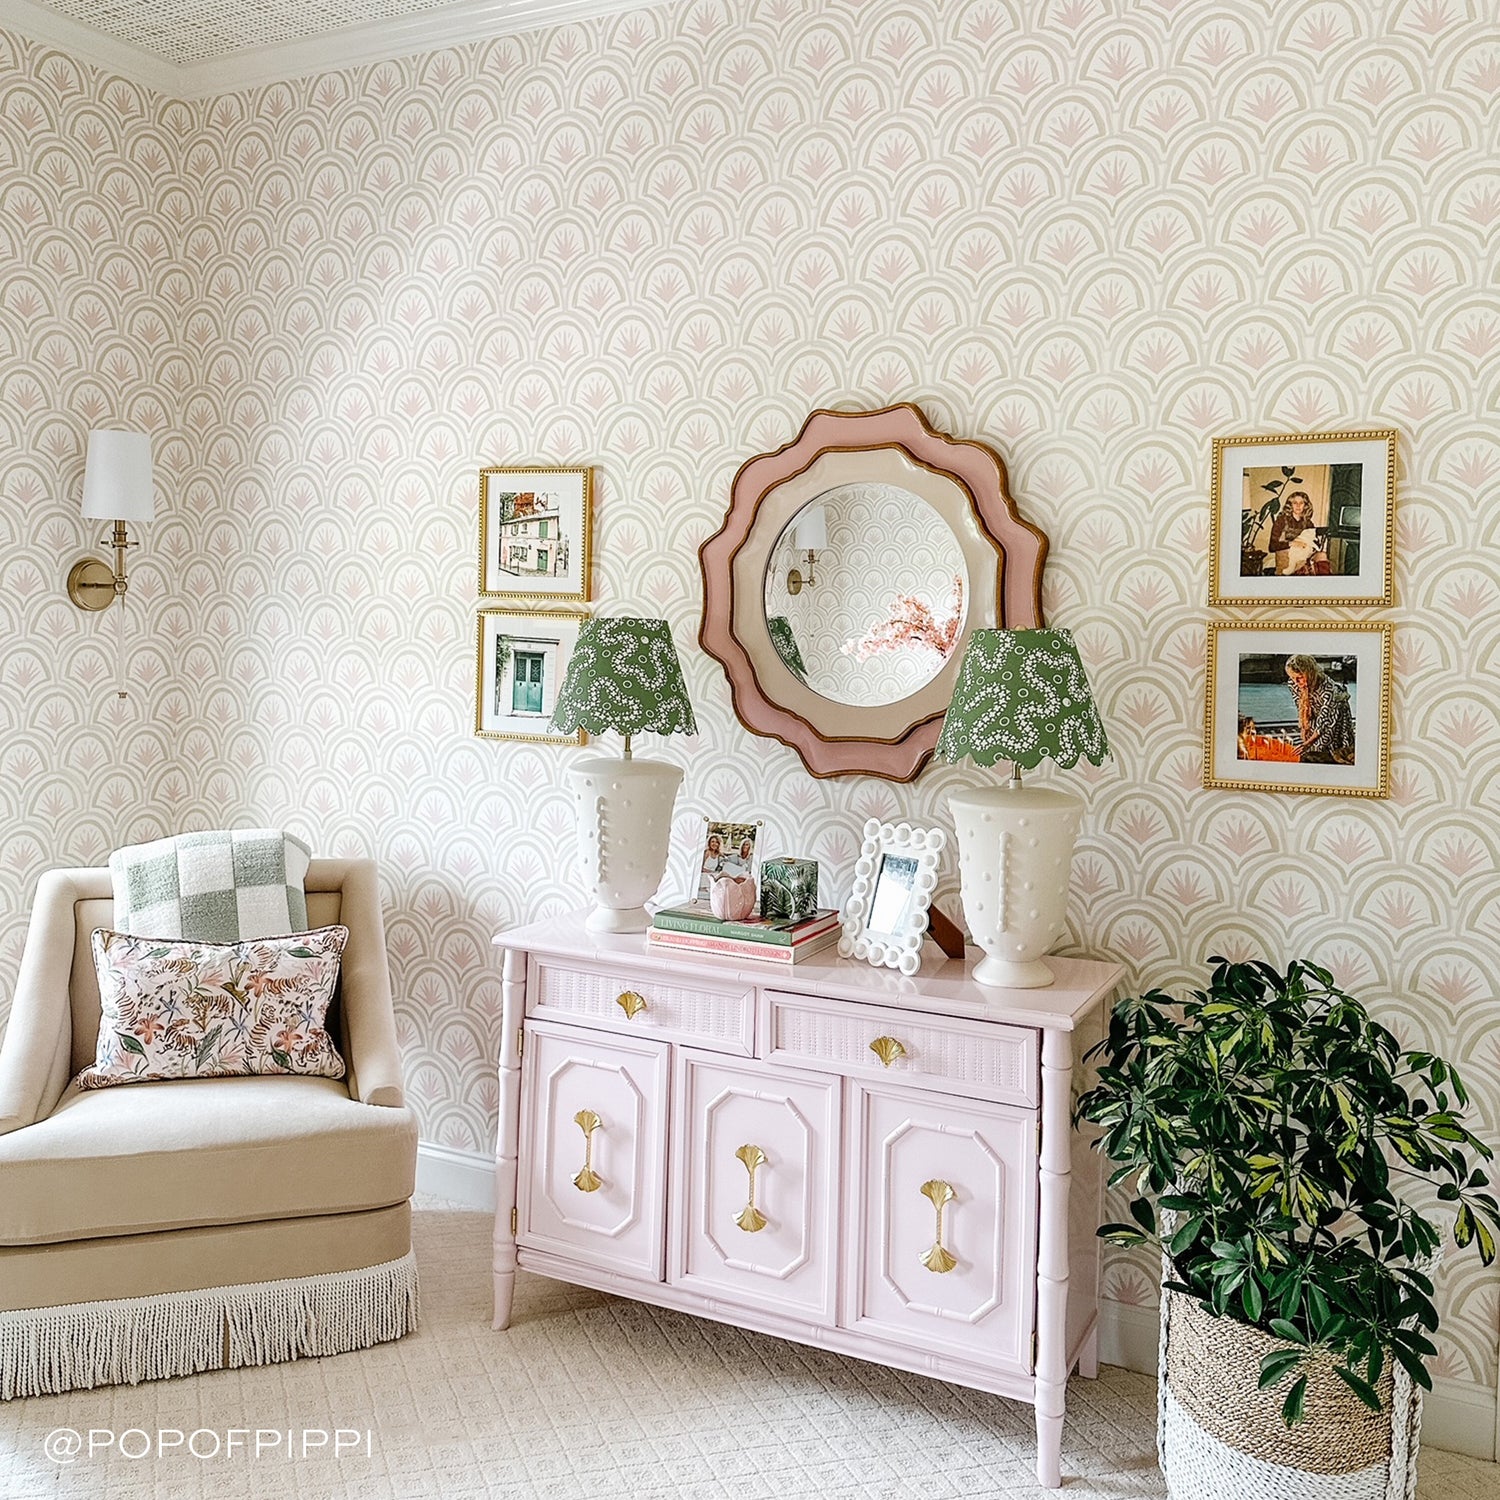 Room corner styled with a Pink Art Deco Palm Printed Wallpaper with a mirror hung on wall on top of pink dresser next to beige sofa chair. Photo taken by Pop of Pippi